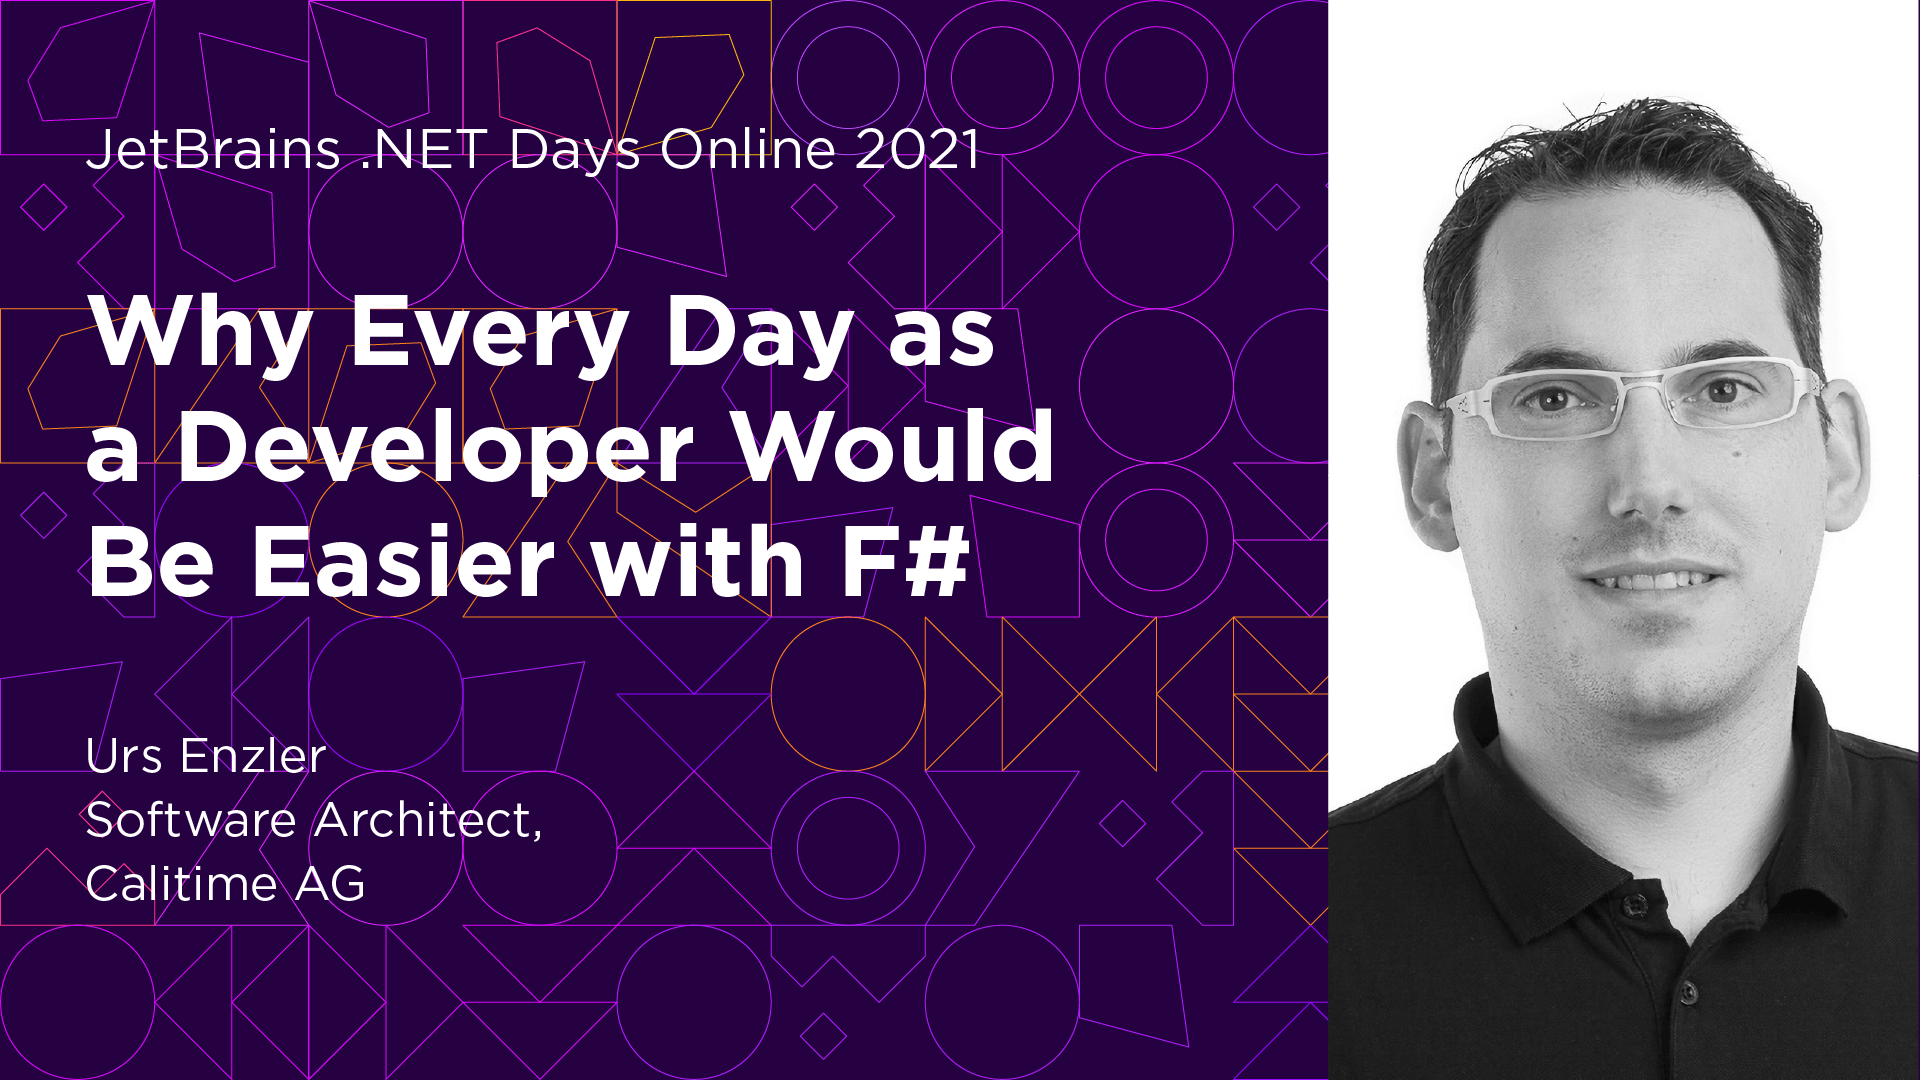 Why Every Day as a Developer Would Be Easier with F#